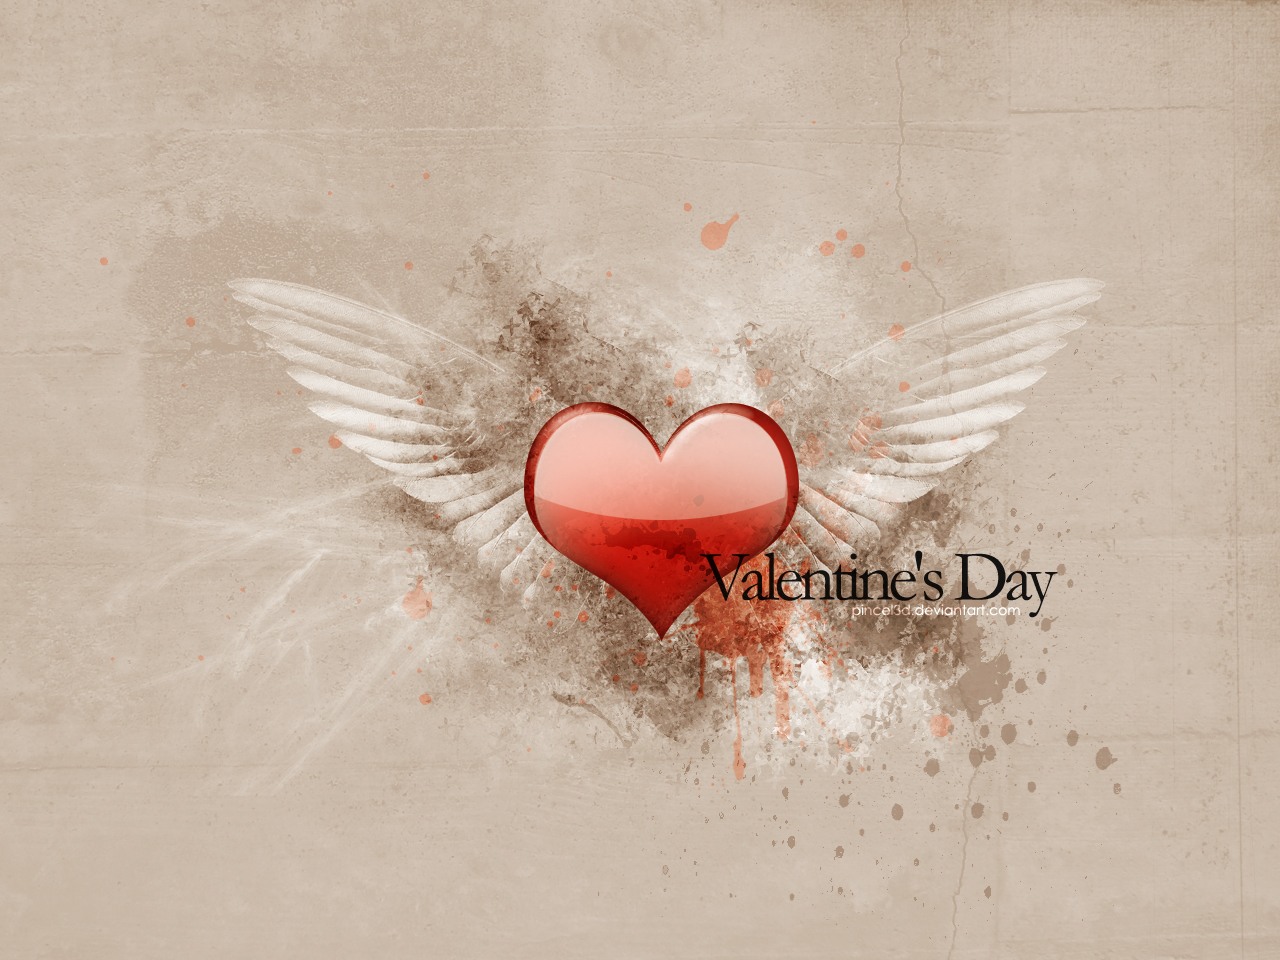 Best Valentines Day Wallpaper To Send Your Loved Ones